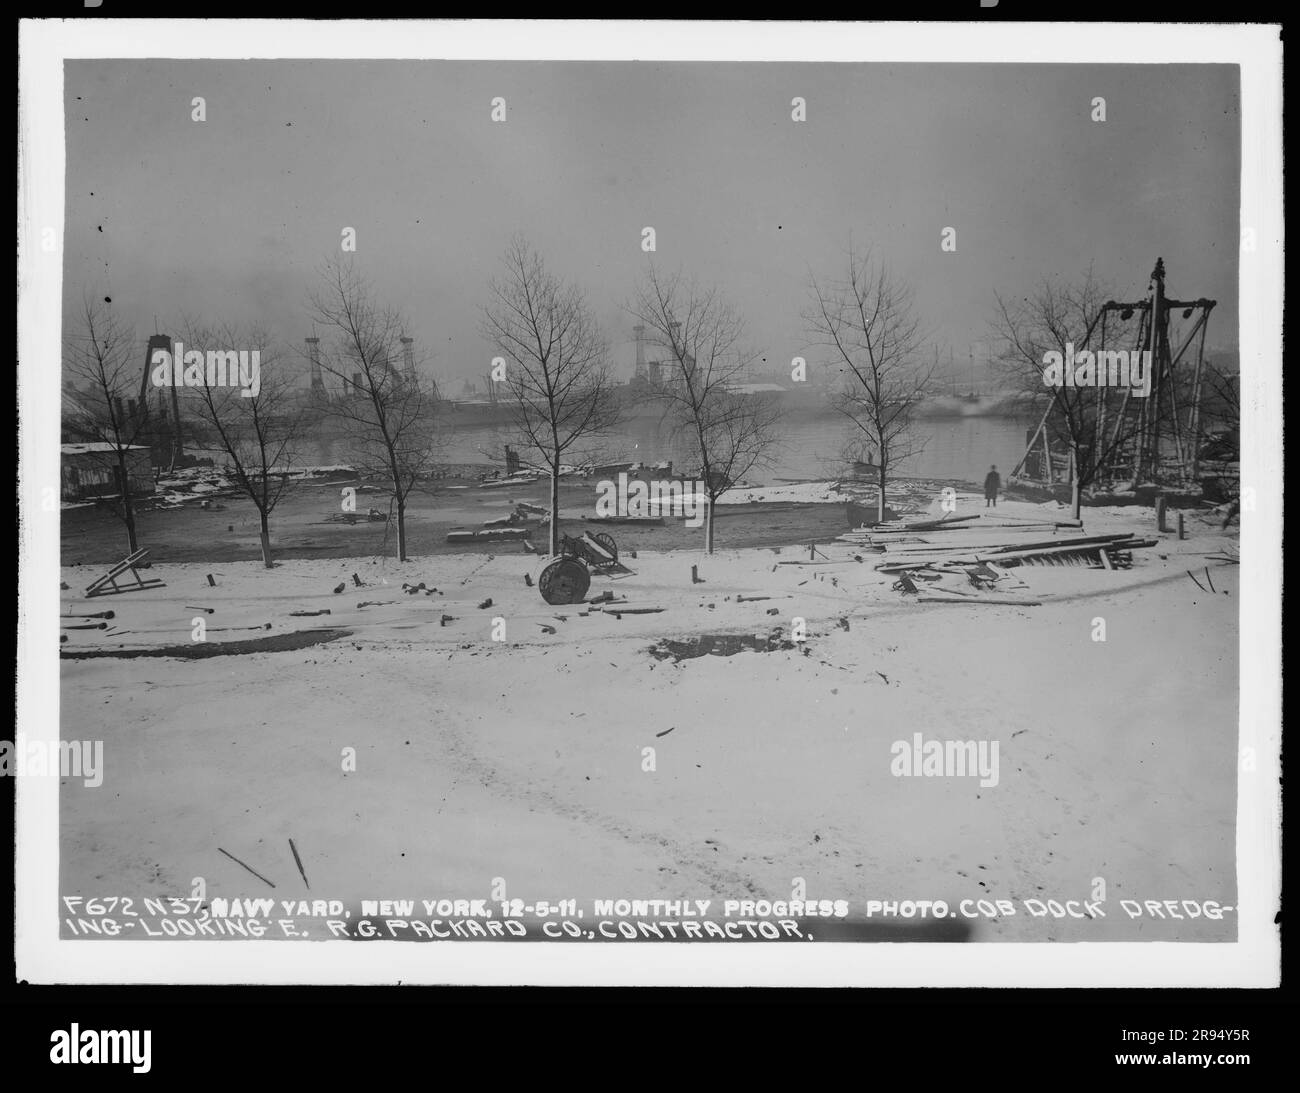 Monthly Progress Photo, Cob Dock Dredging, Looking East, R. G. Packard Company, Contractor. Glass Plate Negatives of the Construction and Repair of Buildings, Facilities, and Vessels at the New York Navy Yard. Stock Photo